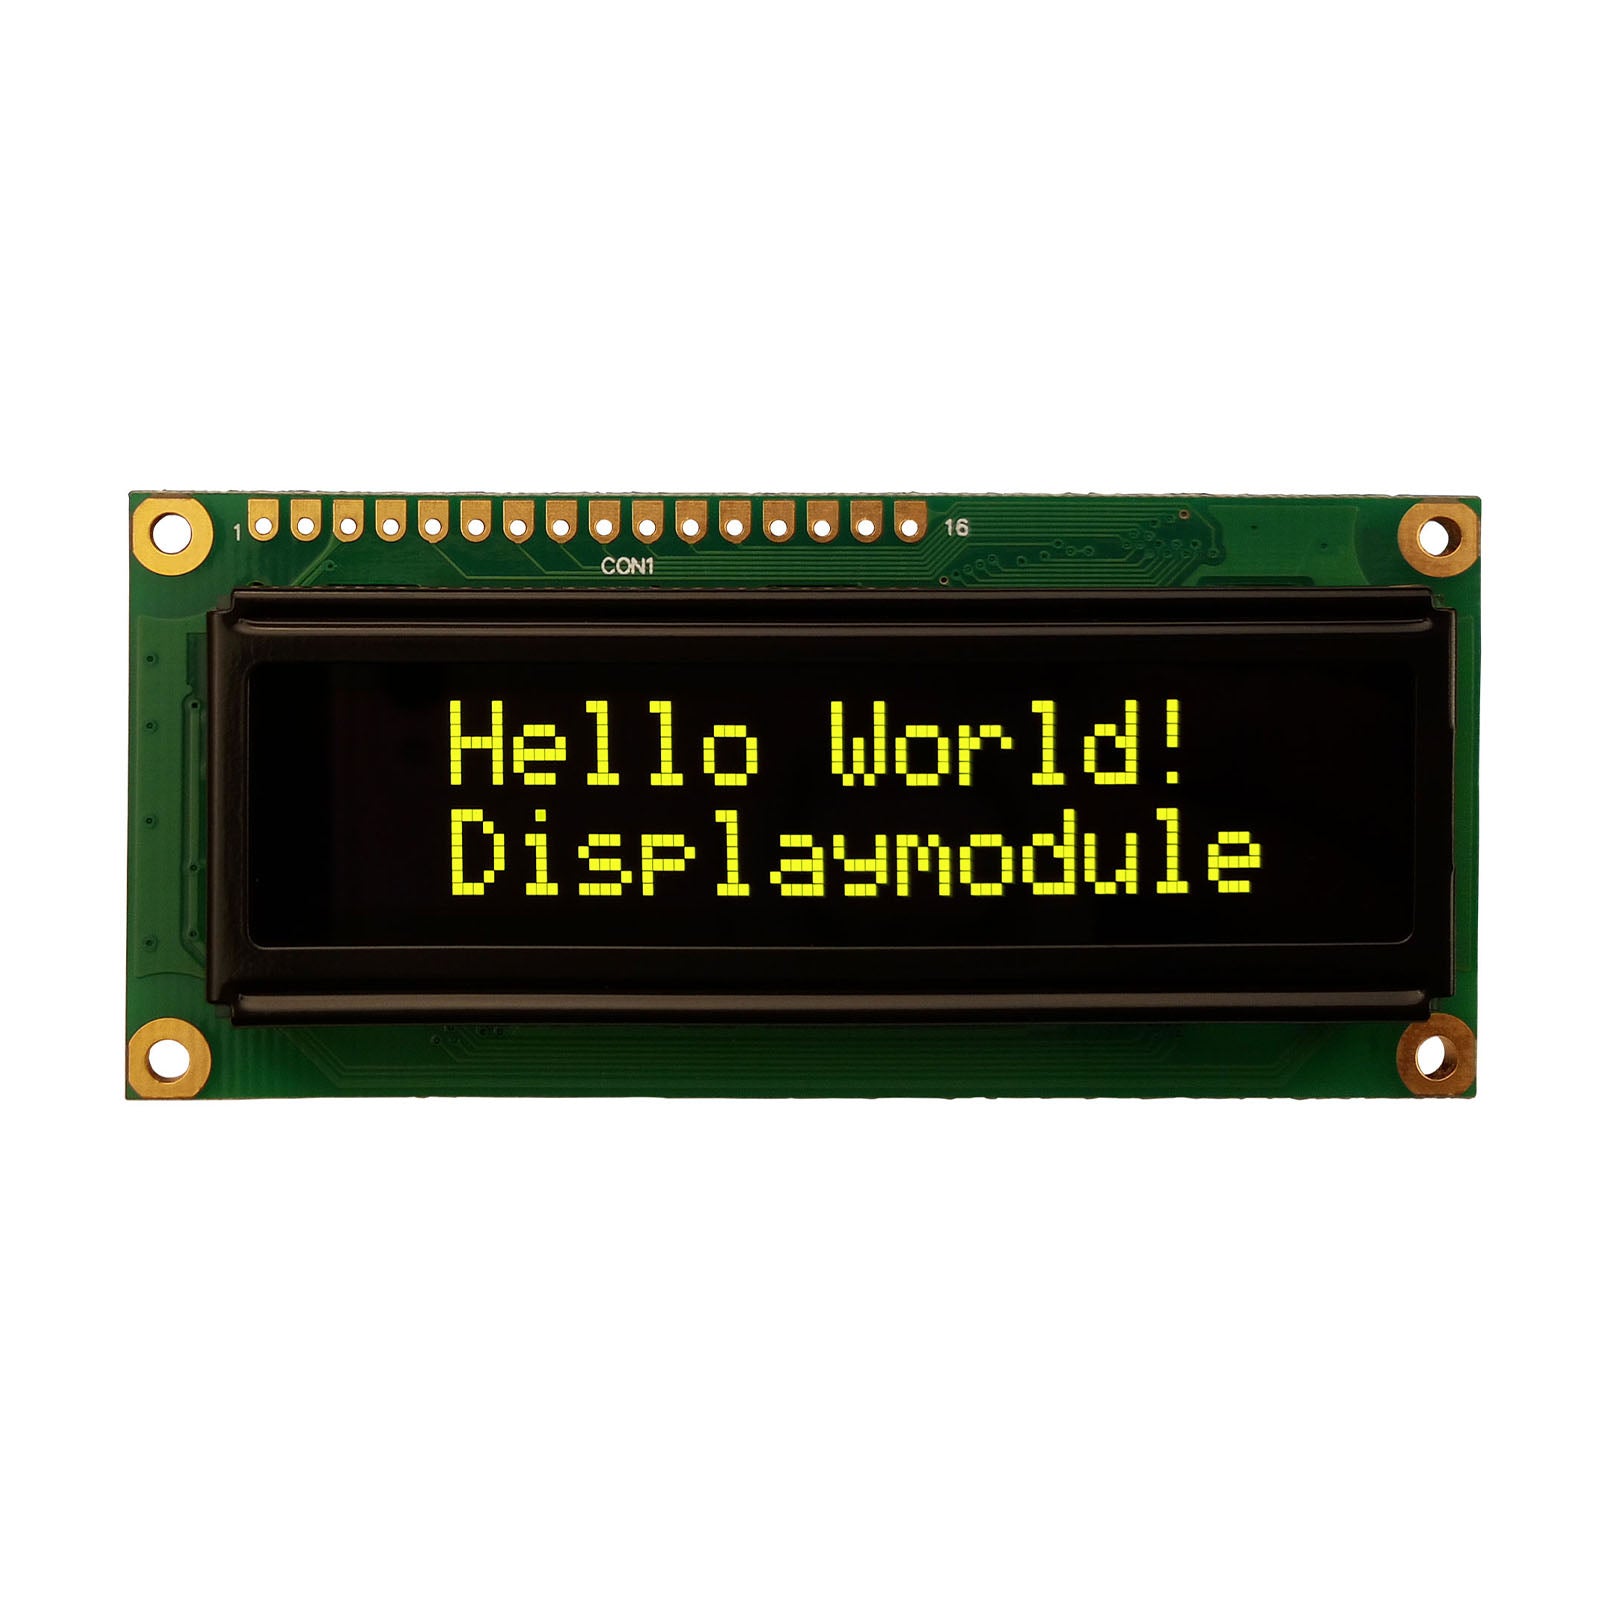 16x2 yellow OLED character display module showing "Hello World! Displaymodule" with MCU, SPI, and I2C interfaces